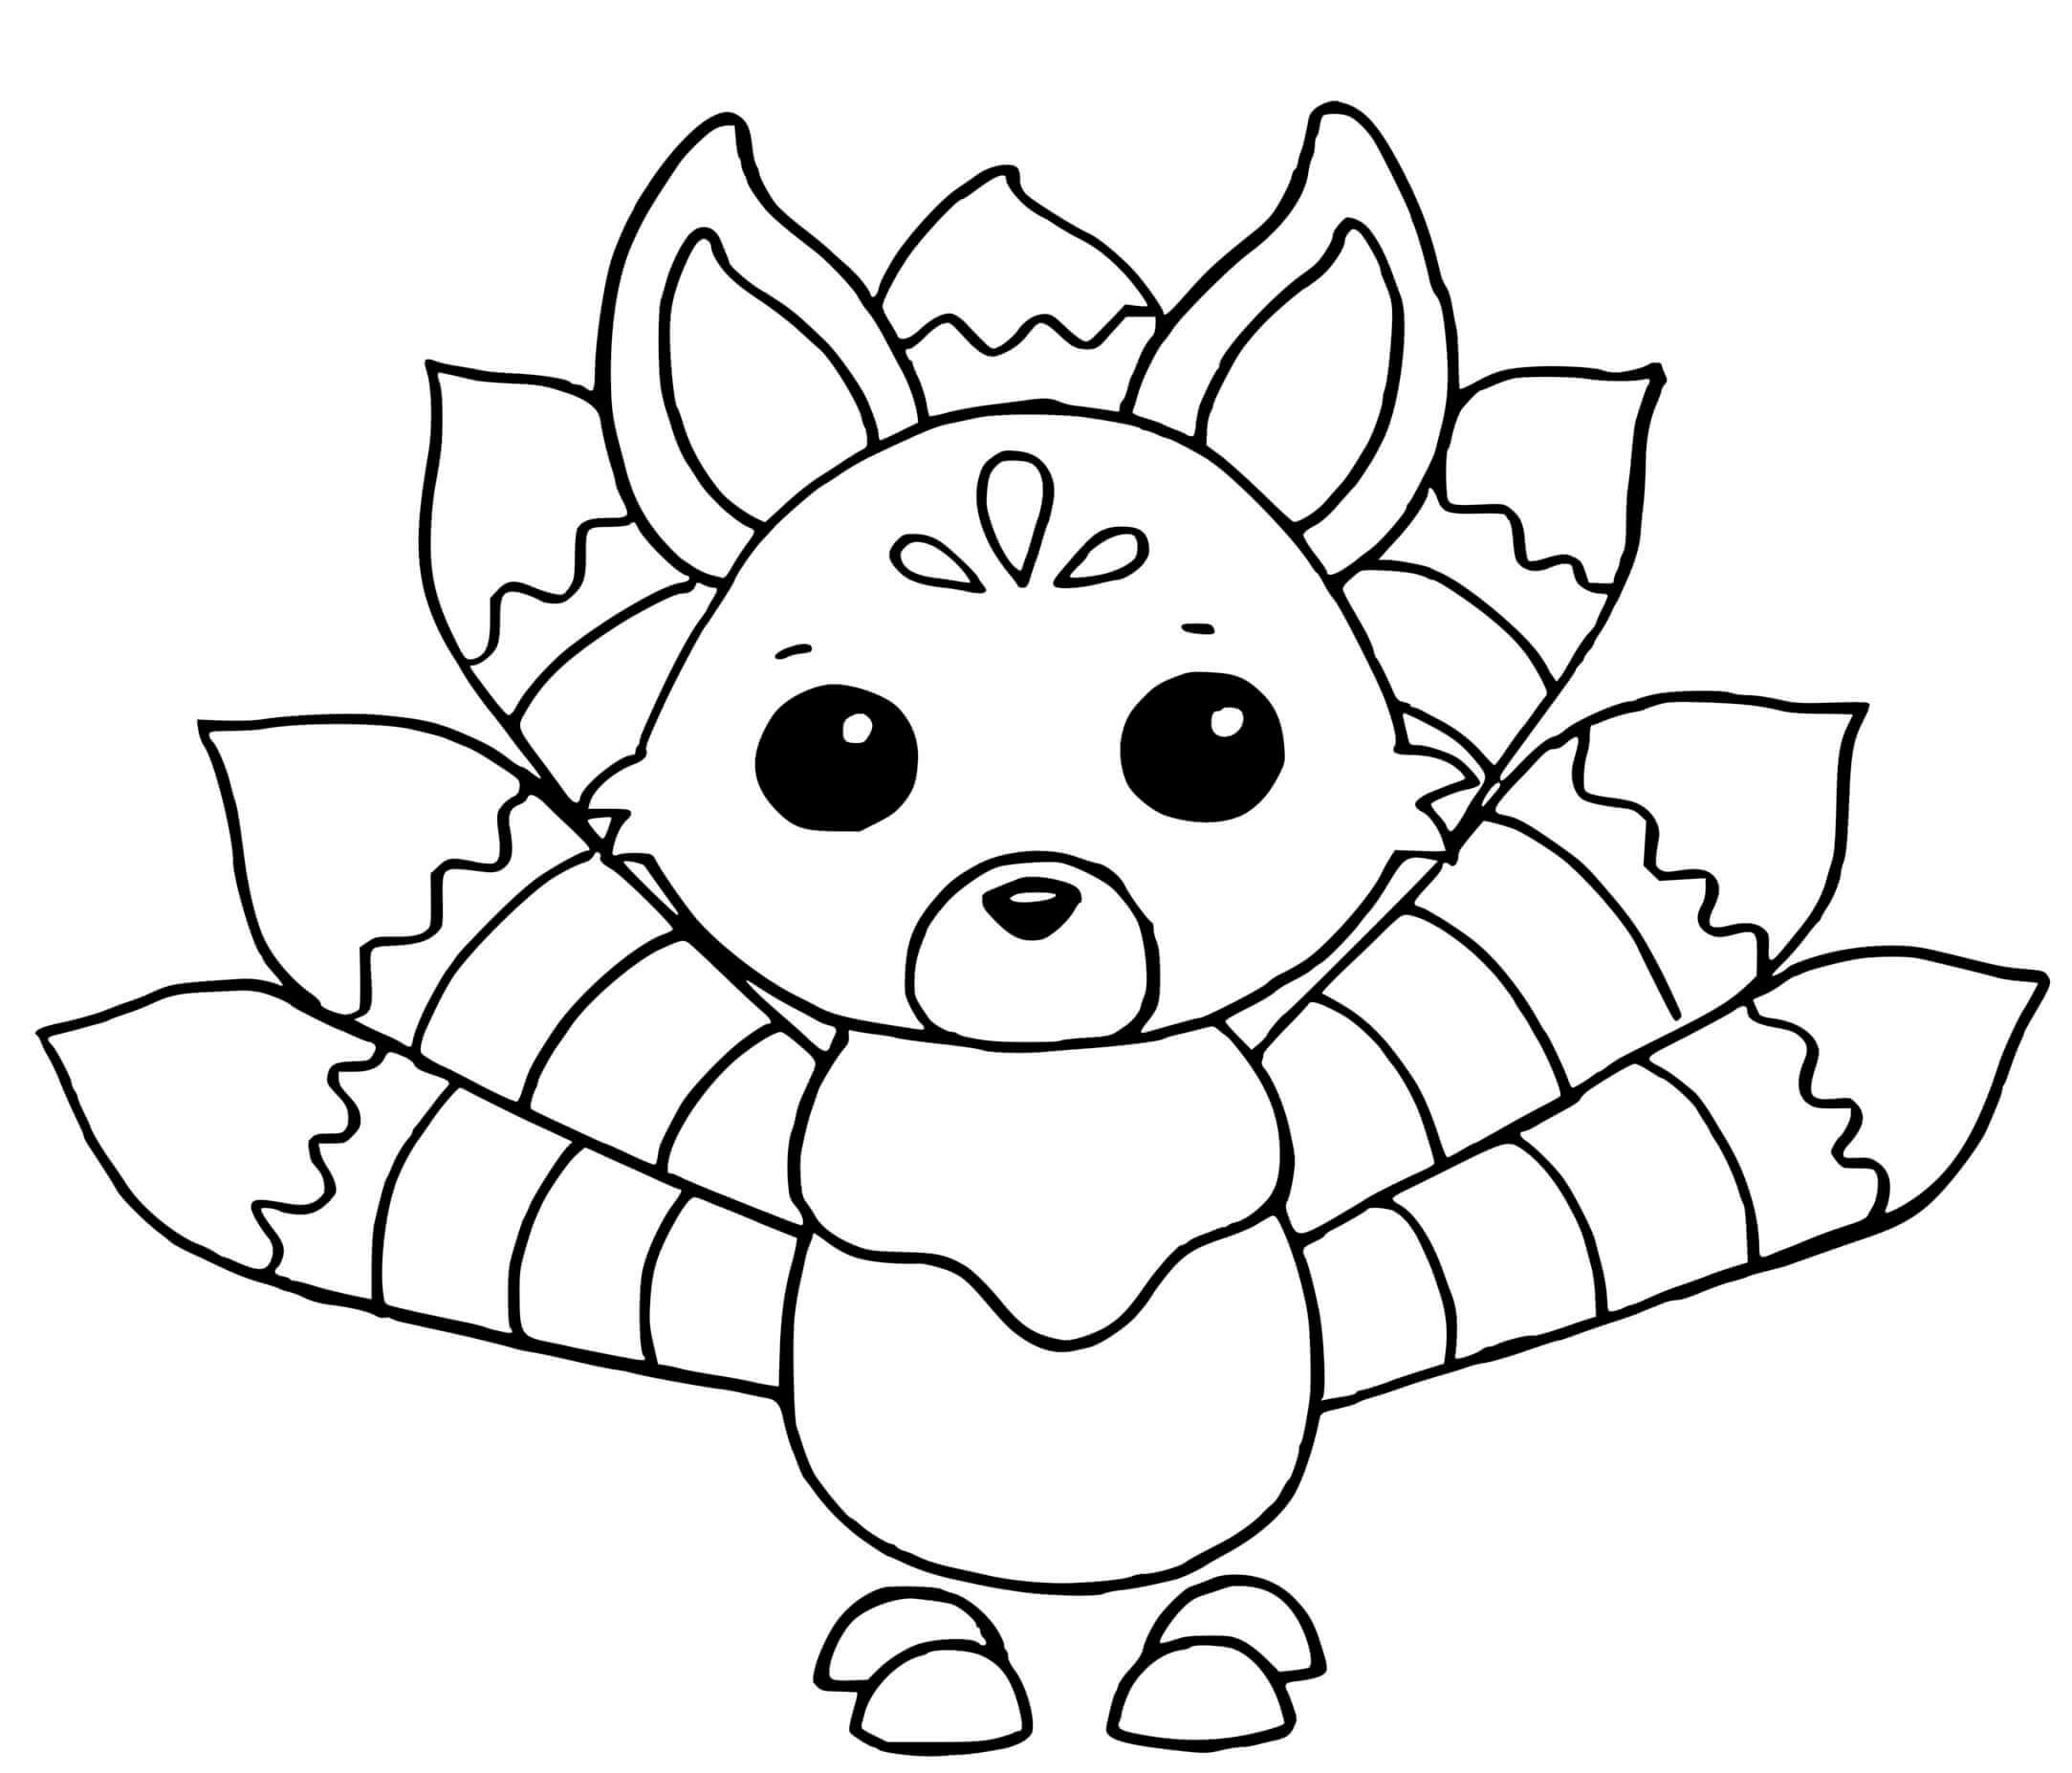 Adopt Me Kitsune Coloring Pages   Coloring Cool